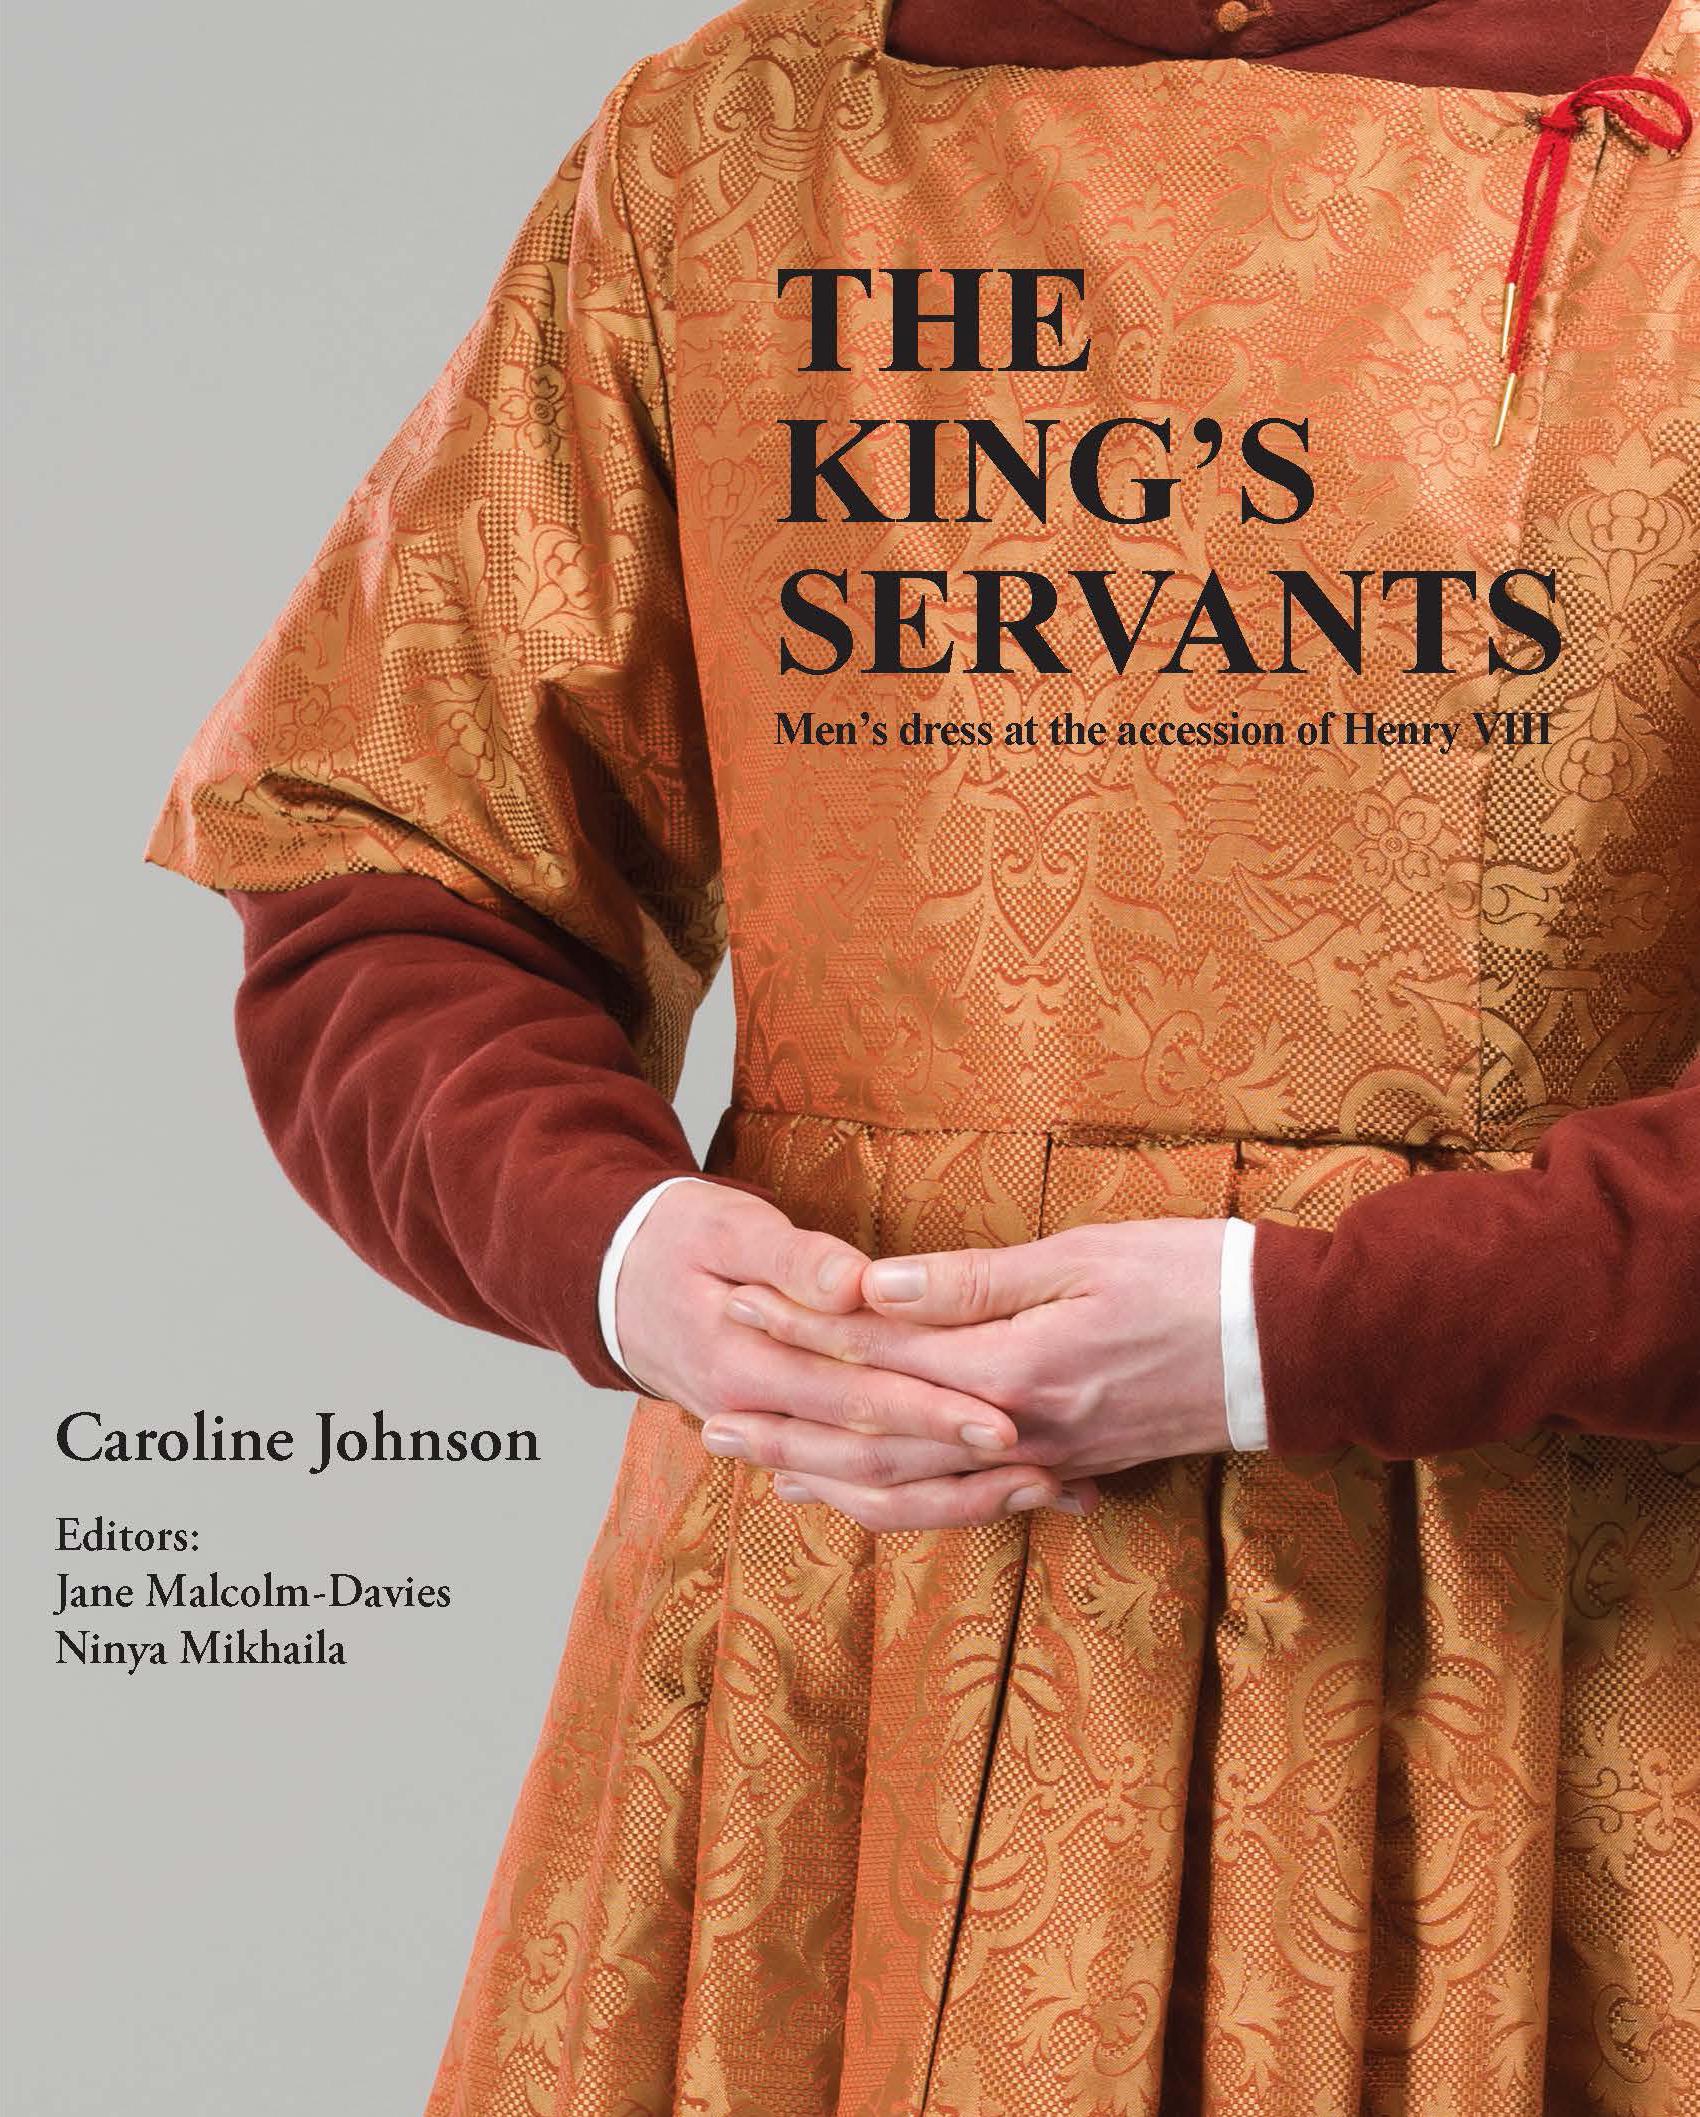 All new edition of 'The King's Servants' available this month